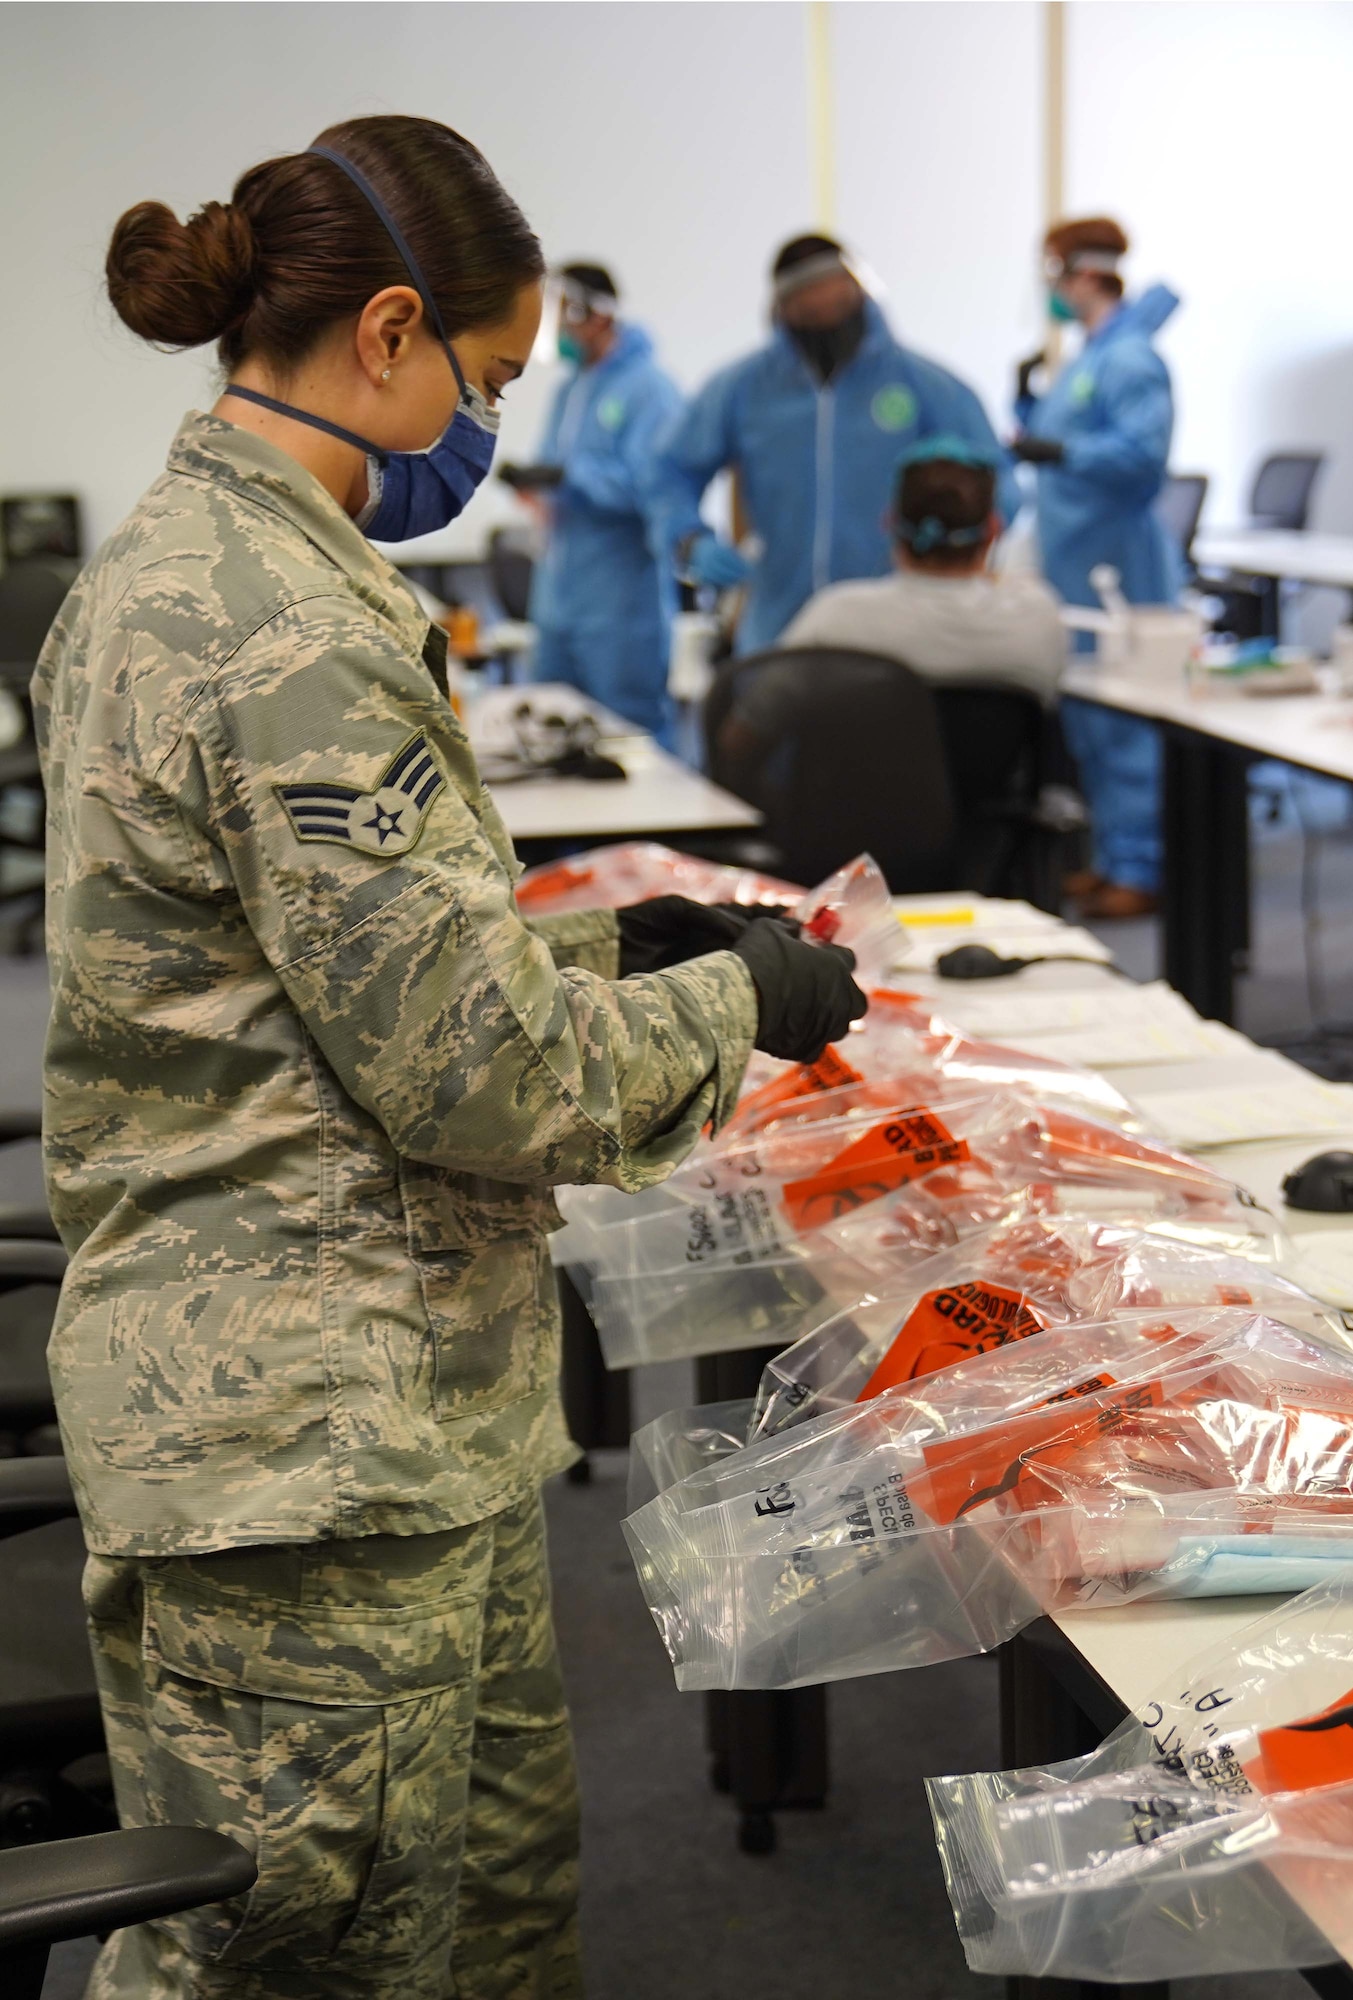 U.S. Air Force Senior Airman Brook Lee, 81st Diagnostic and Therapeutics Squadron laboratory technician, organizes samples for COVID-19 testing at the Combat Readiness Training Center in Gulfport, Mississippi, July 14, 2020. Airmen from Keesler Air Force Base, Mississippi, assisted in testing over 900 Sailors as part of the joint and total force effort across Navy and Air Force active duty and guard installations along the Gulf Coast. (U.S. Air Force photo by Airman 1st Class Kimberly L. Mueller)